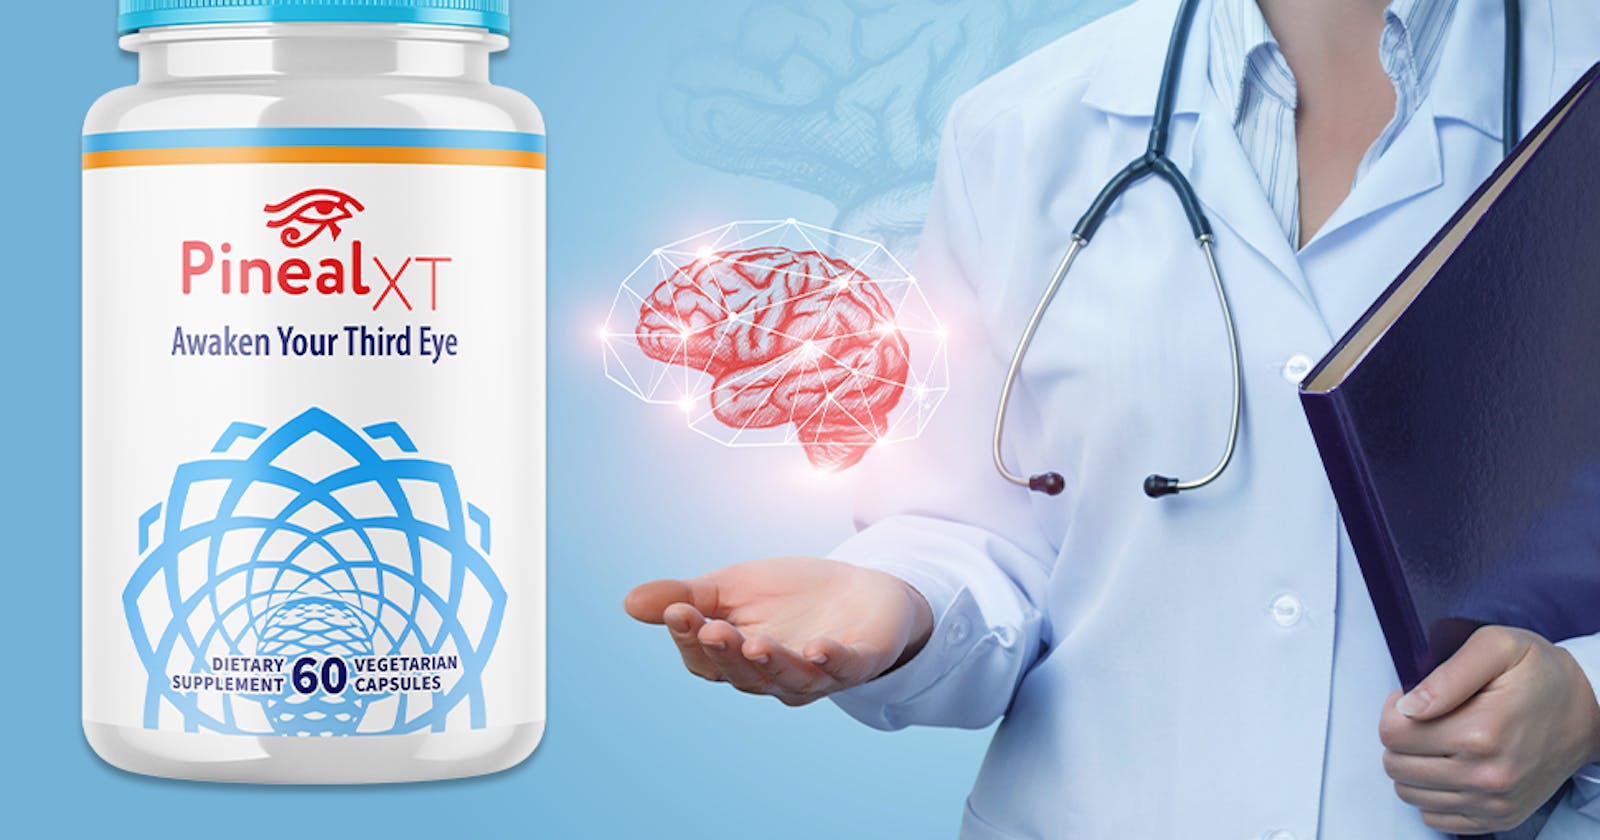 Pineal XT Can Enhance Your Mind and Body!